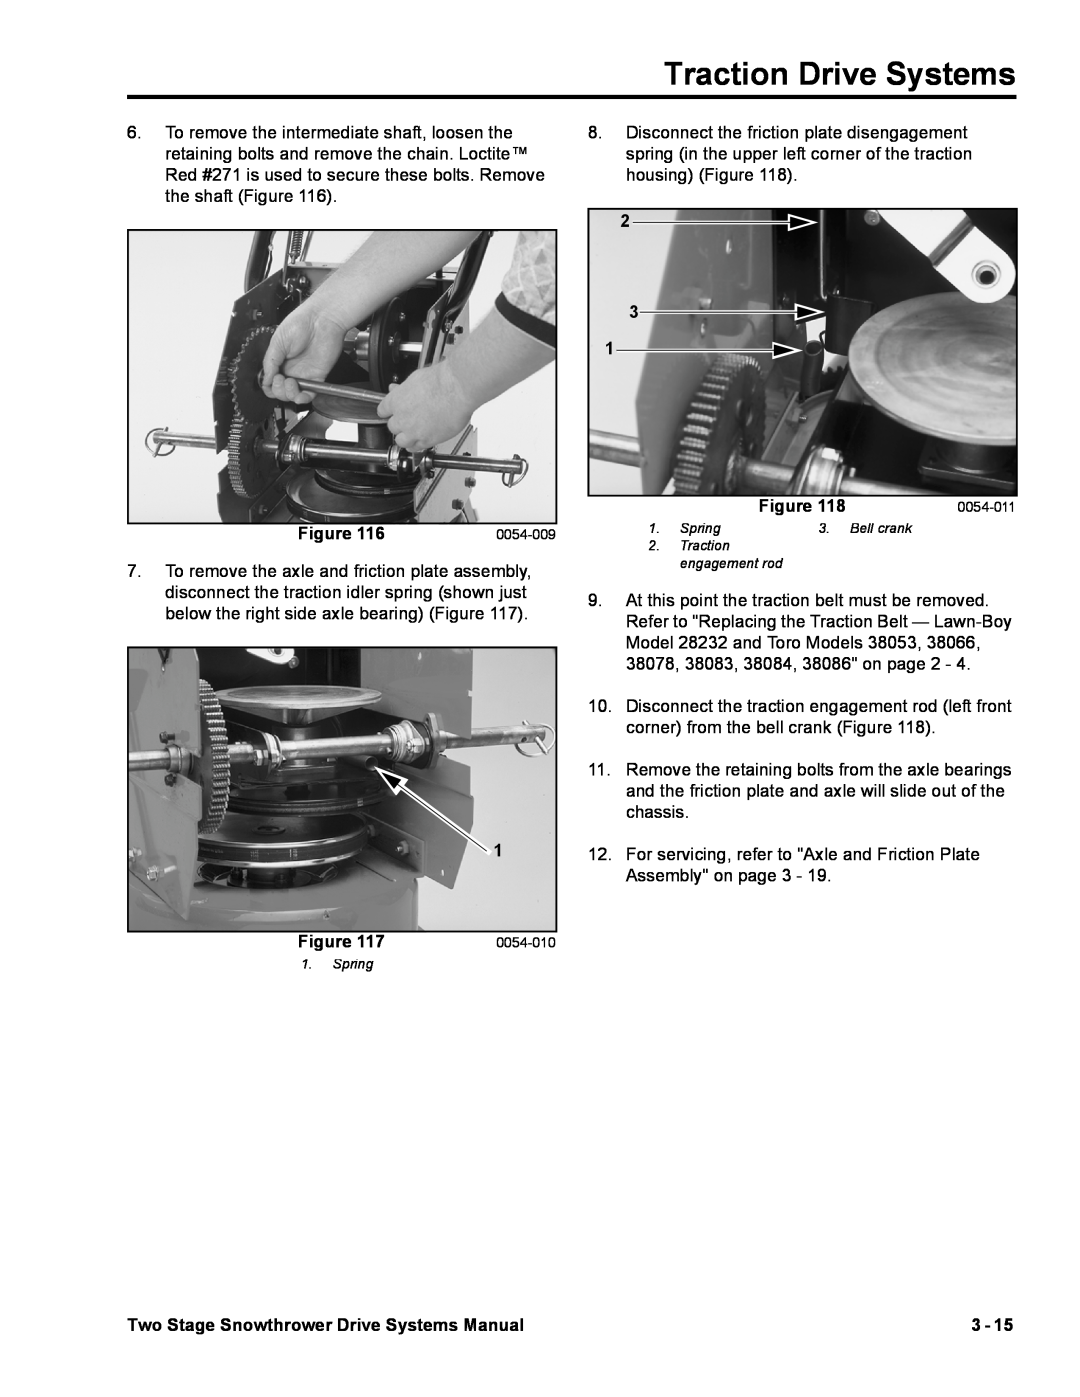 Toro 38065, 38080 manual Traction Drive Systems, Two Stage Snowthrower Drive Systems Manual, Bell crank 